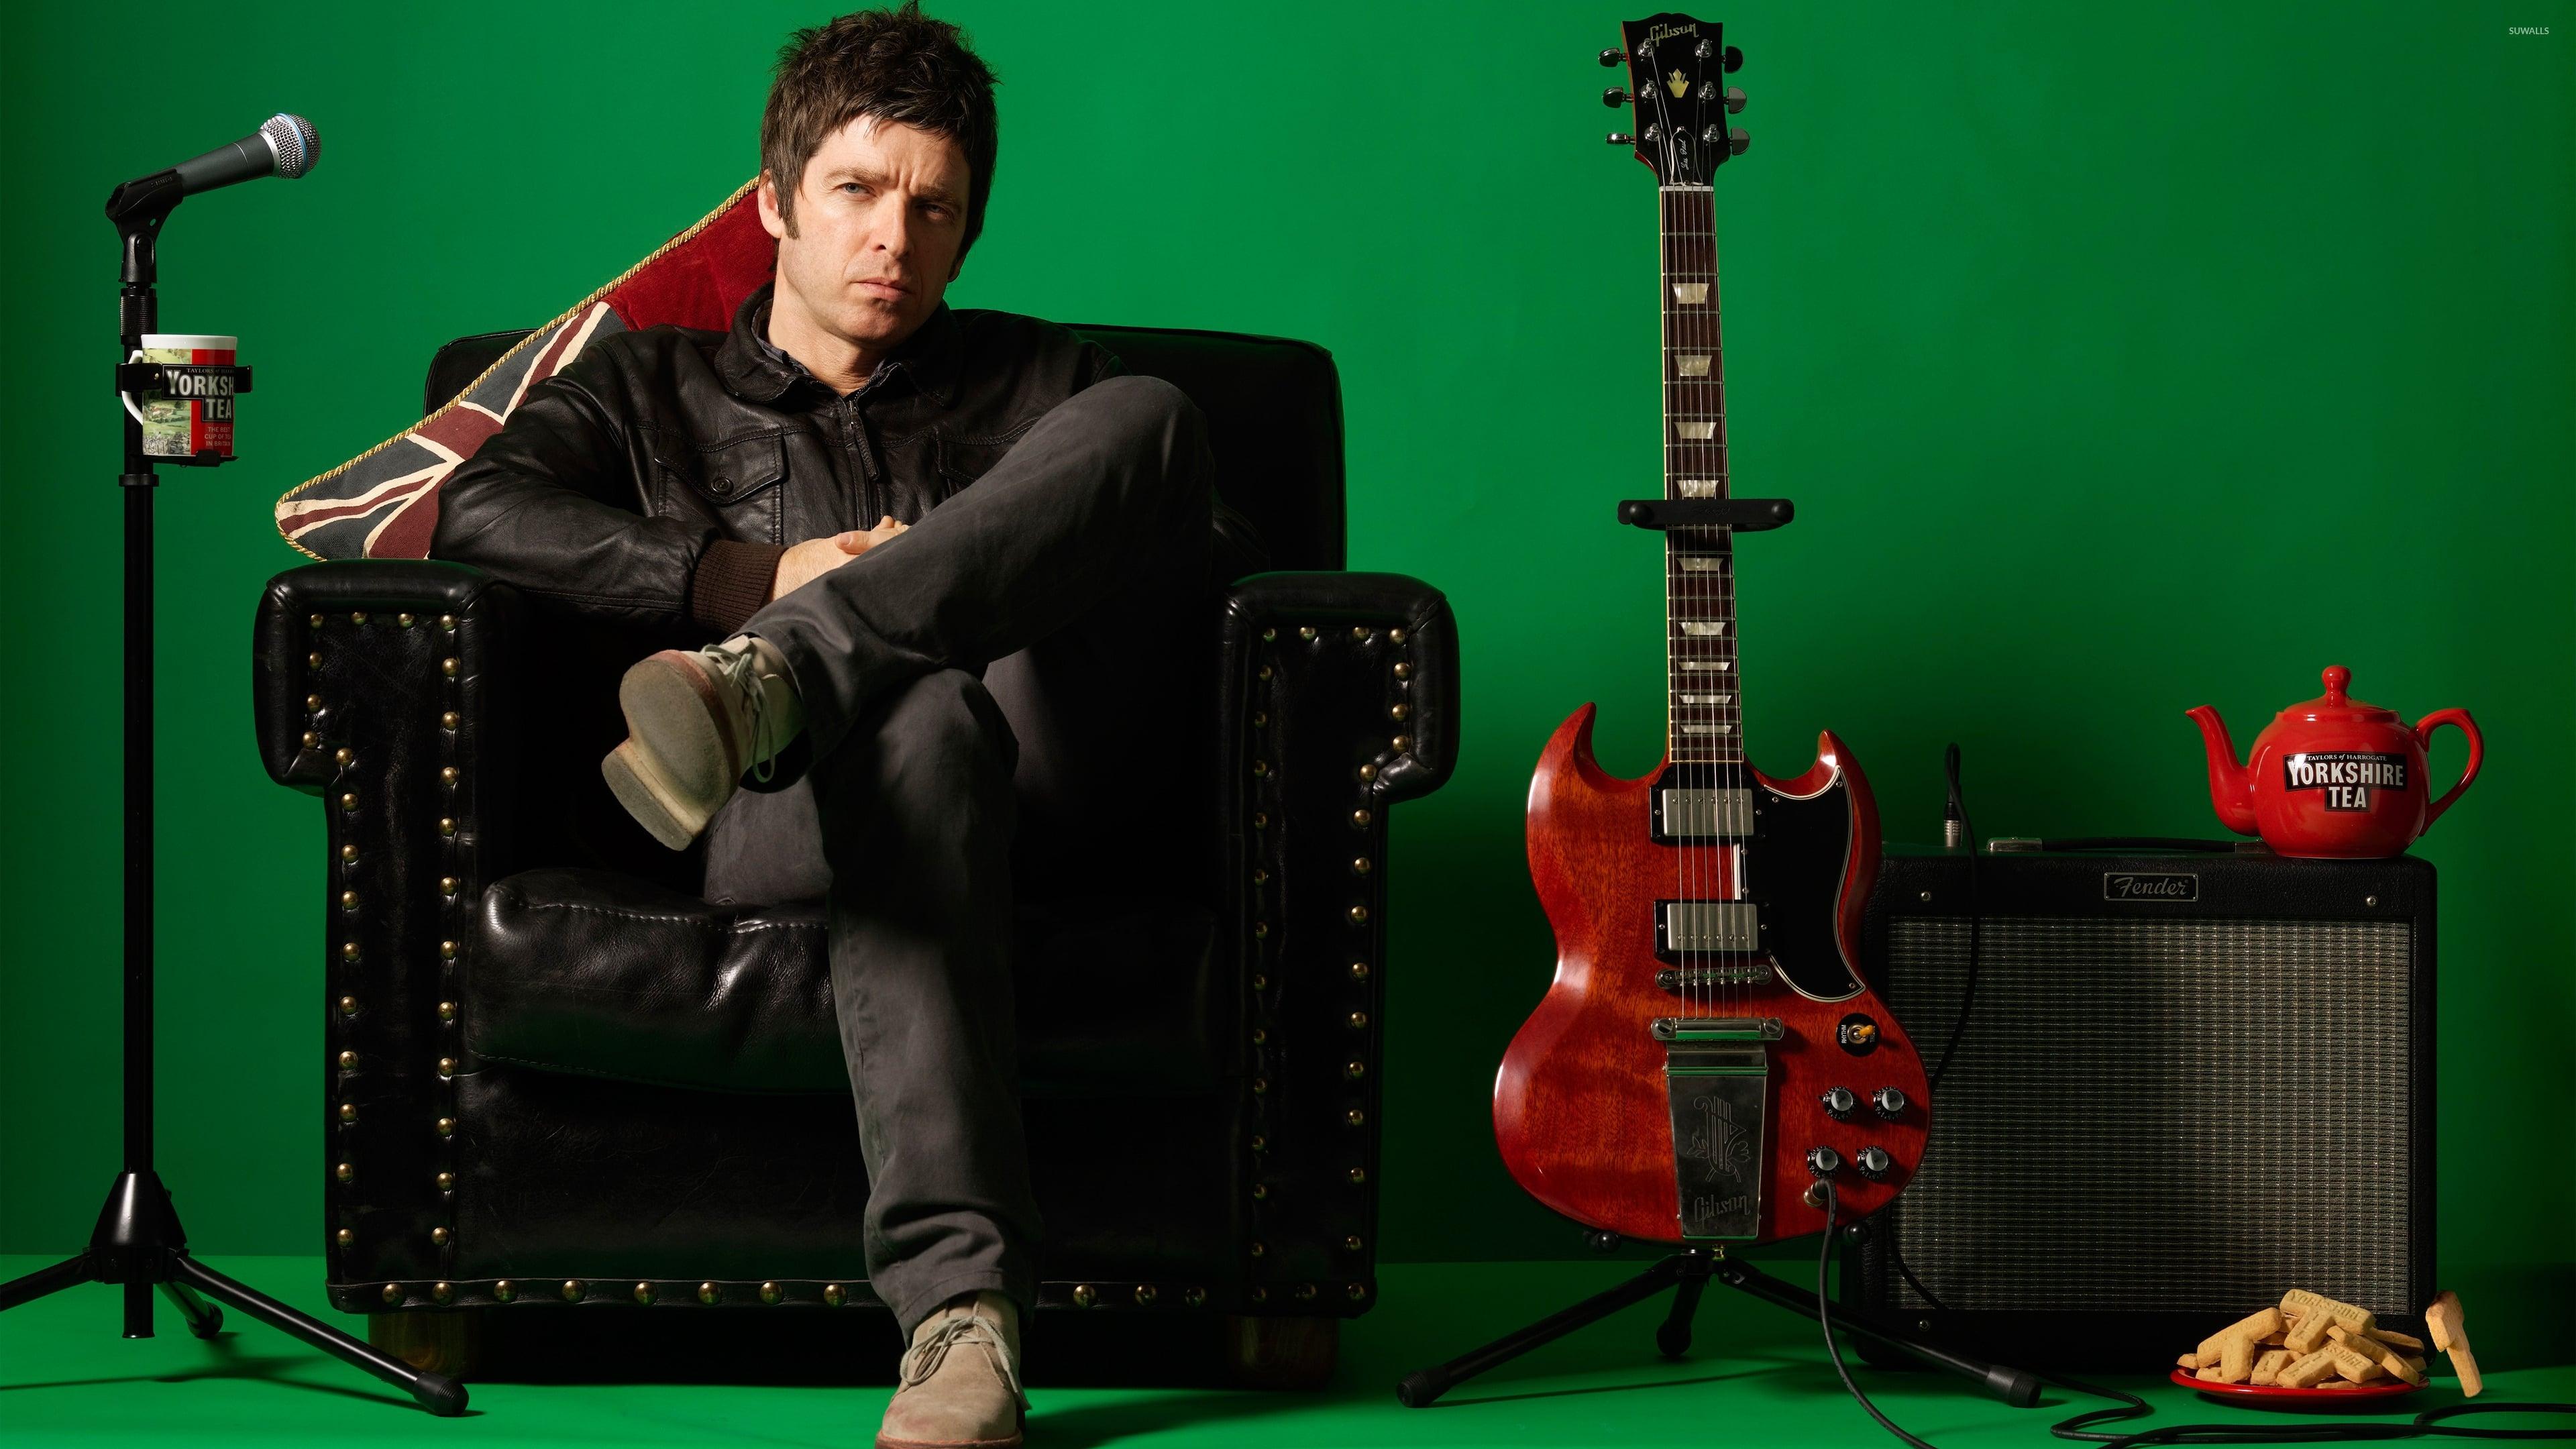 Noel Gallagher's High Flying Birds: Live at BBC Radio Theatre backdrop